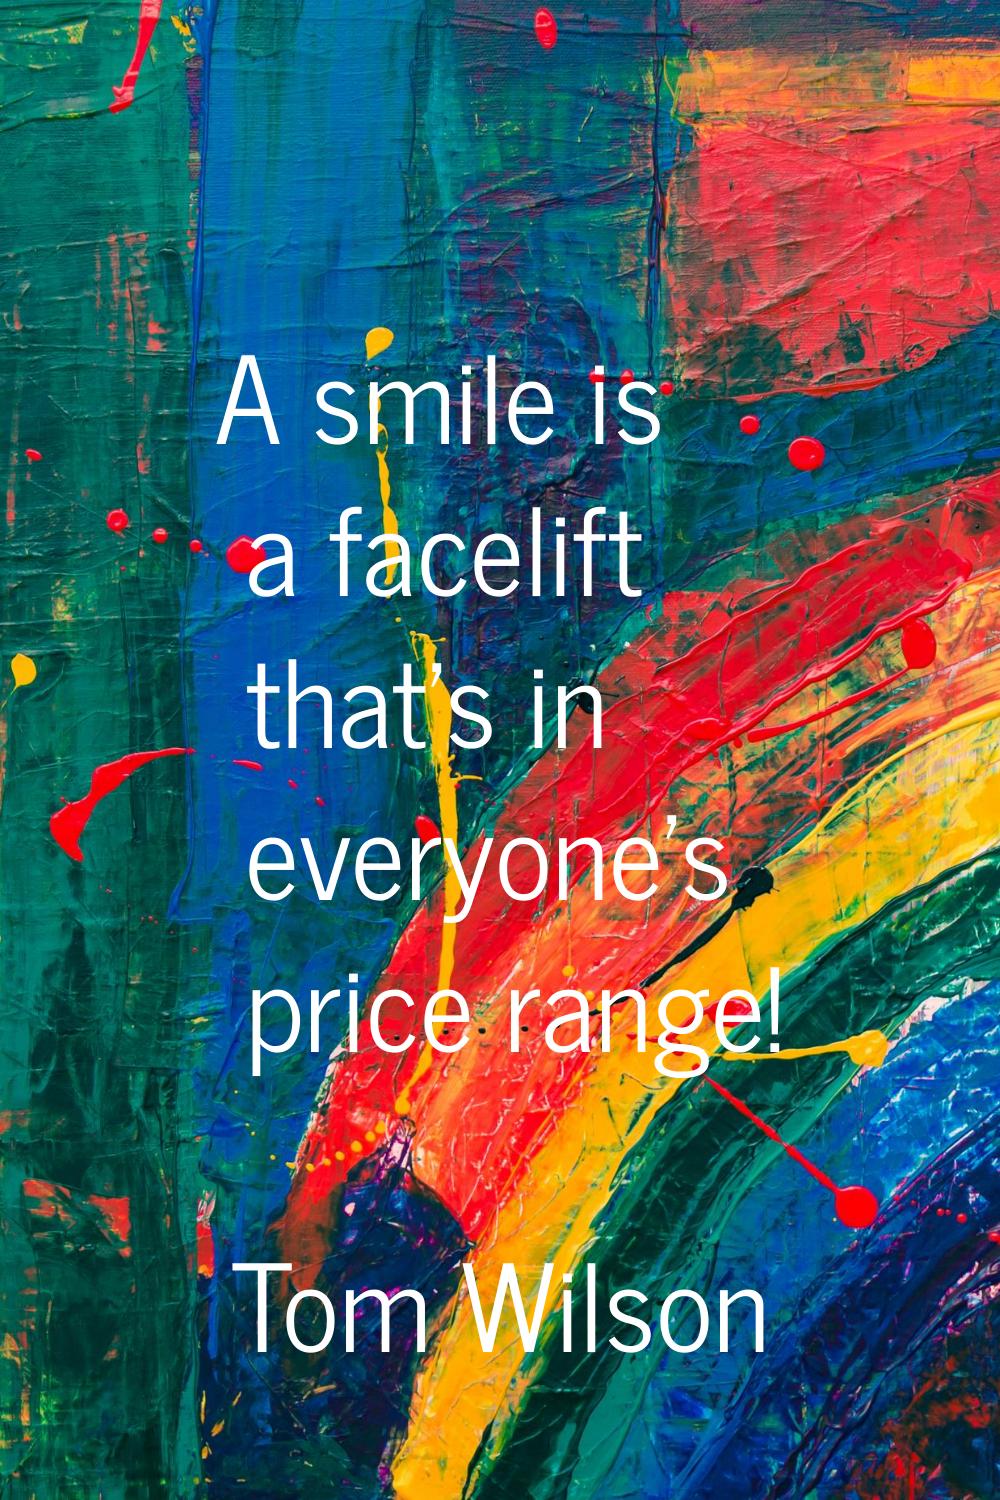 A smile is a facelift that's in everyone's price range!